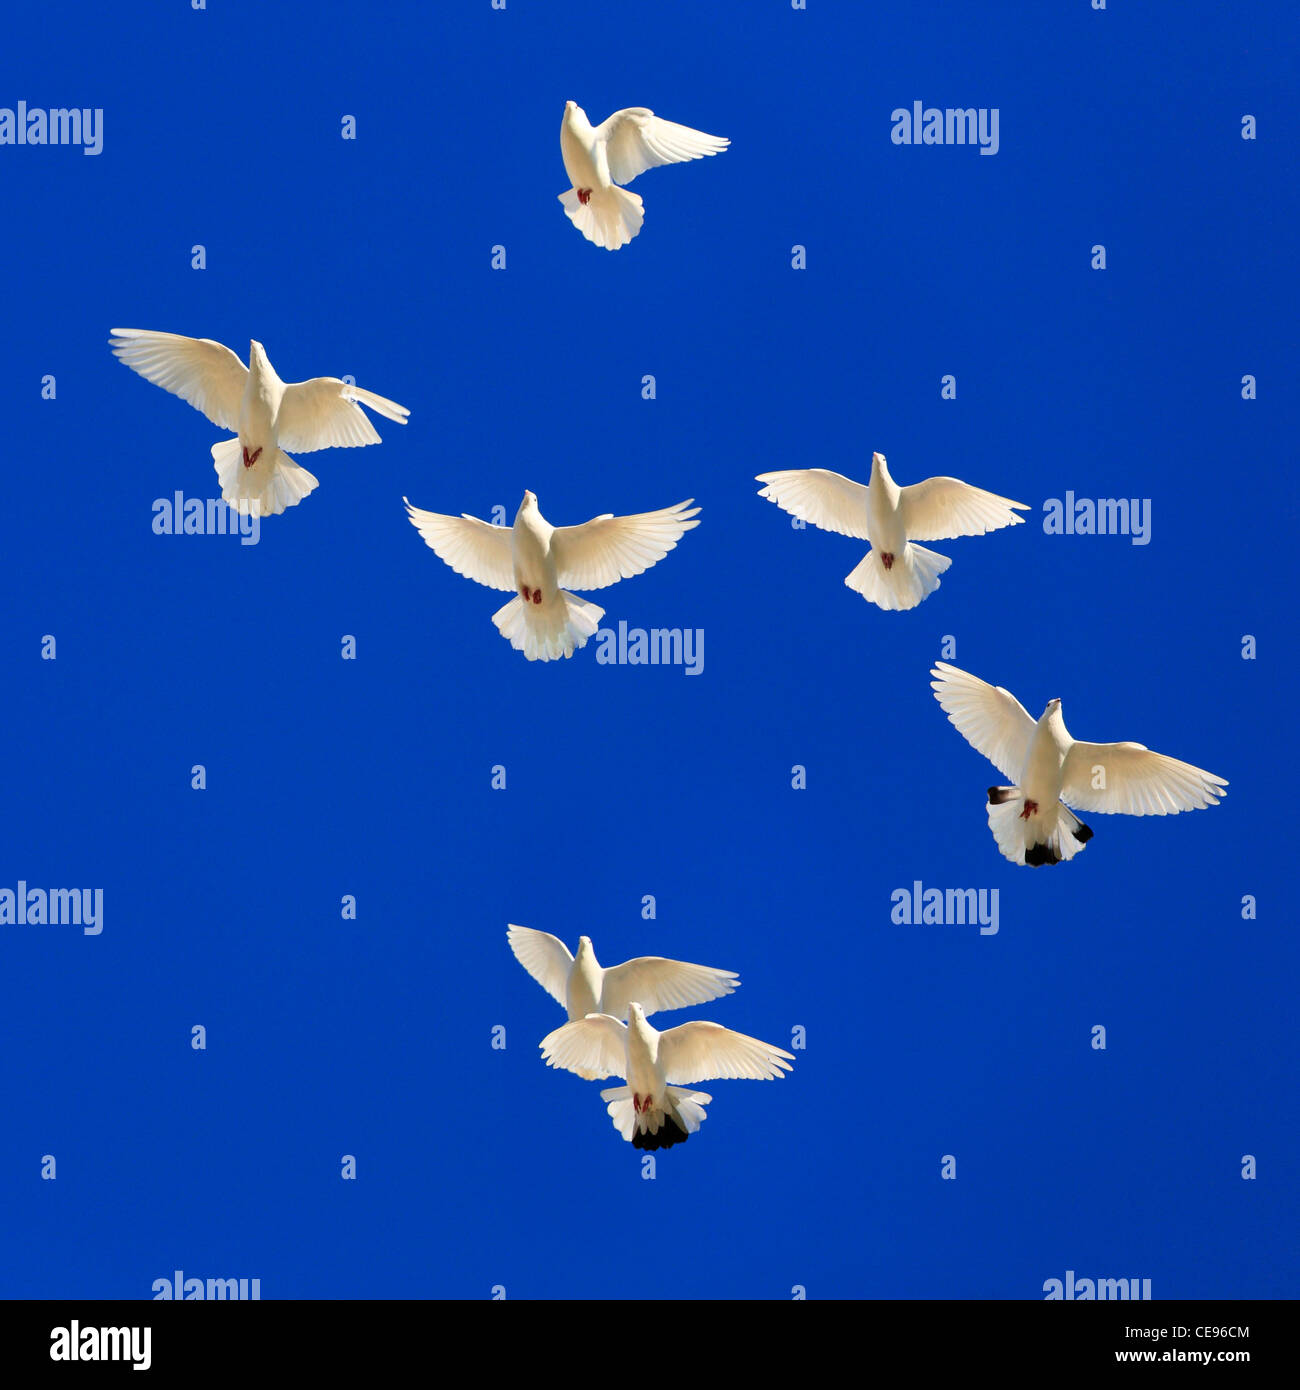 Seven white birds in flight against a deep blue, clear sky. Stock Photo